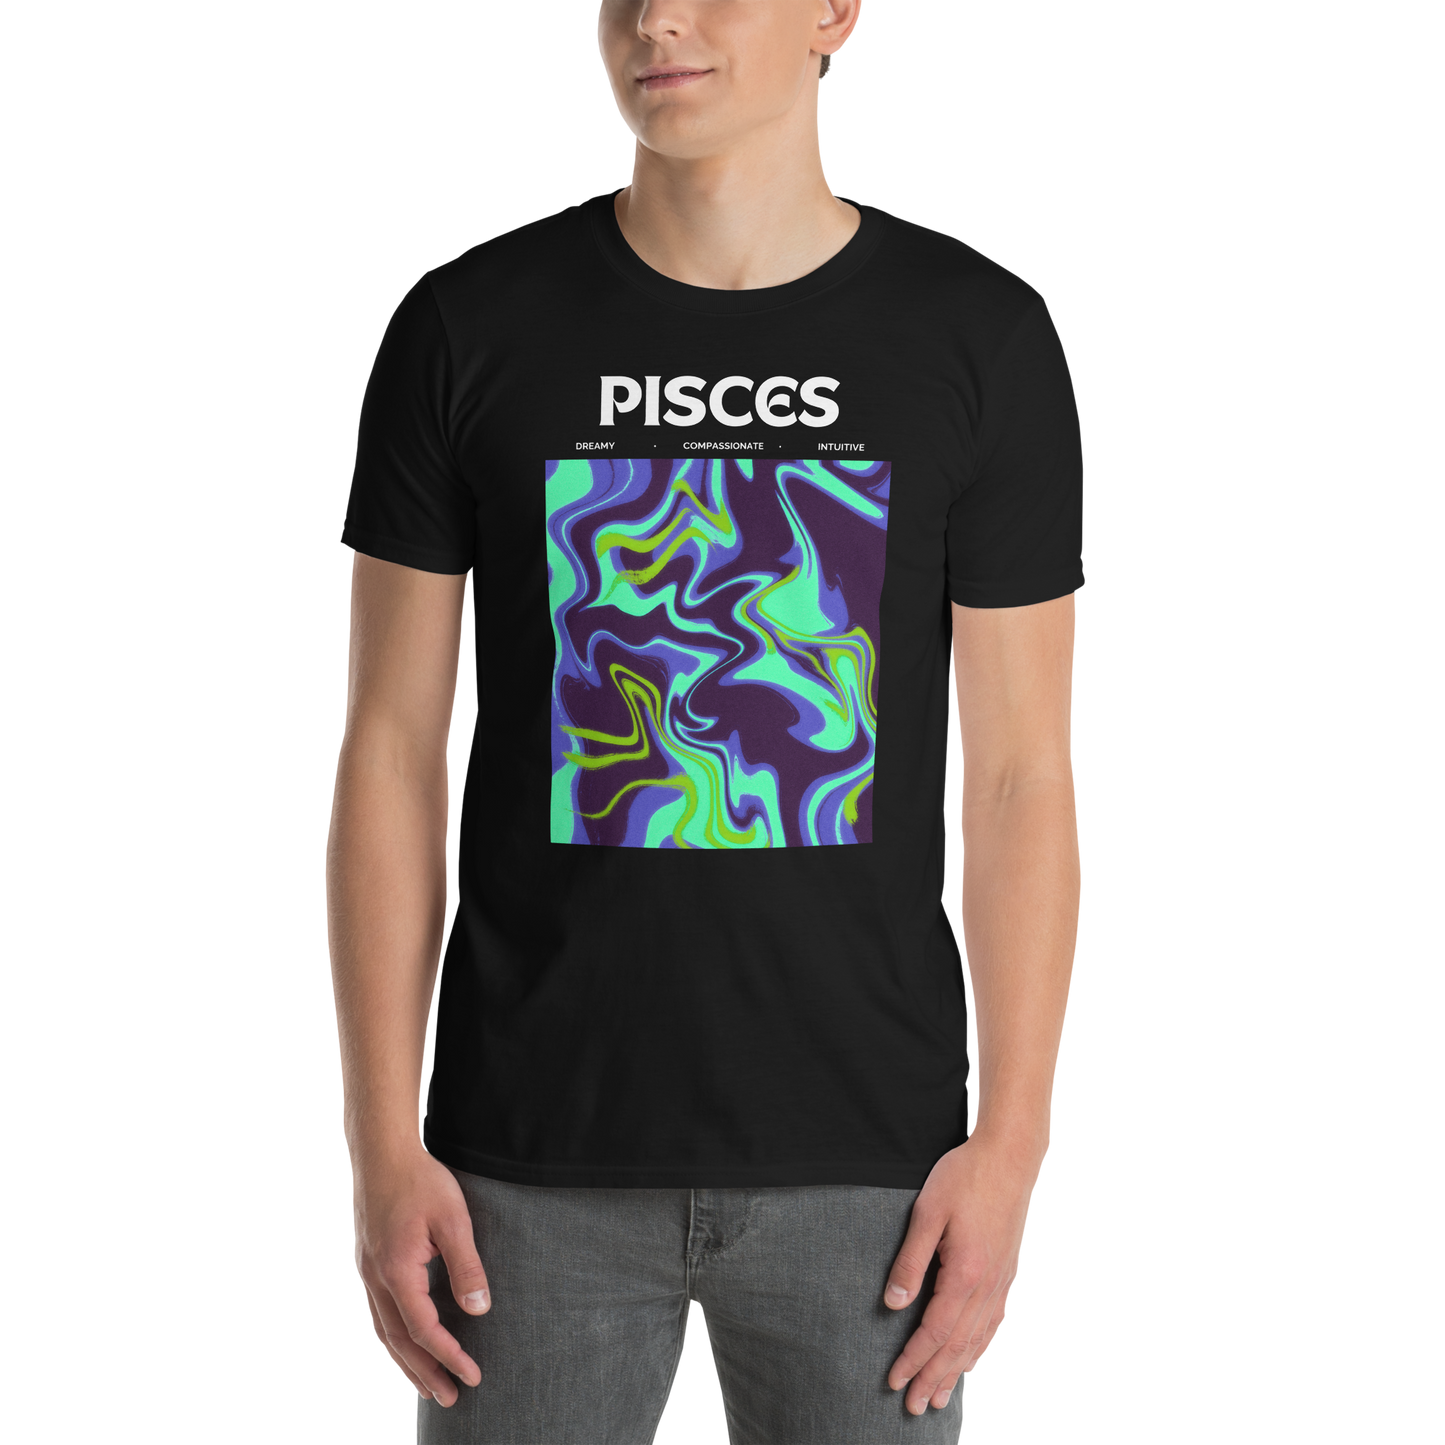 Man wearing a Black Pisces T-Shirt featuring an Abstract Pisces Star Sign graphic on the chest - Cool Graphic Zodiac T-Shirts - Boozy Fox